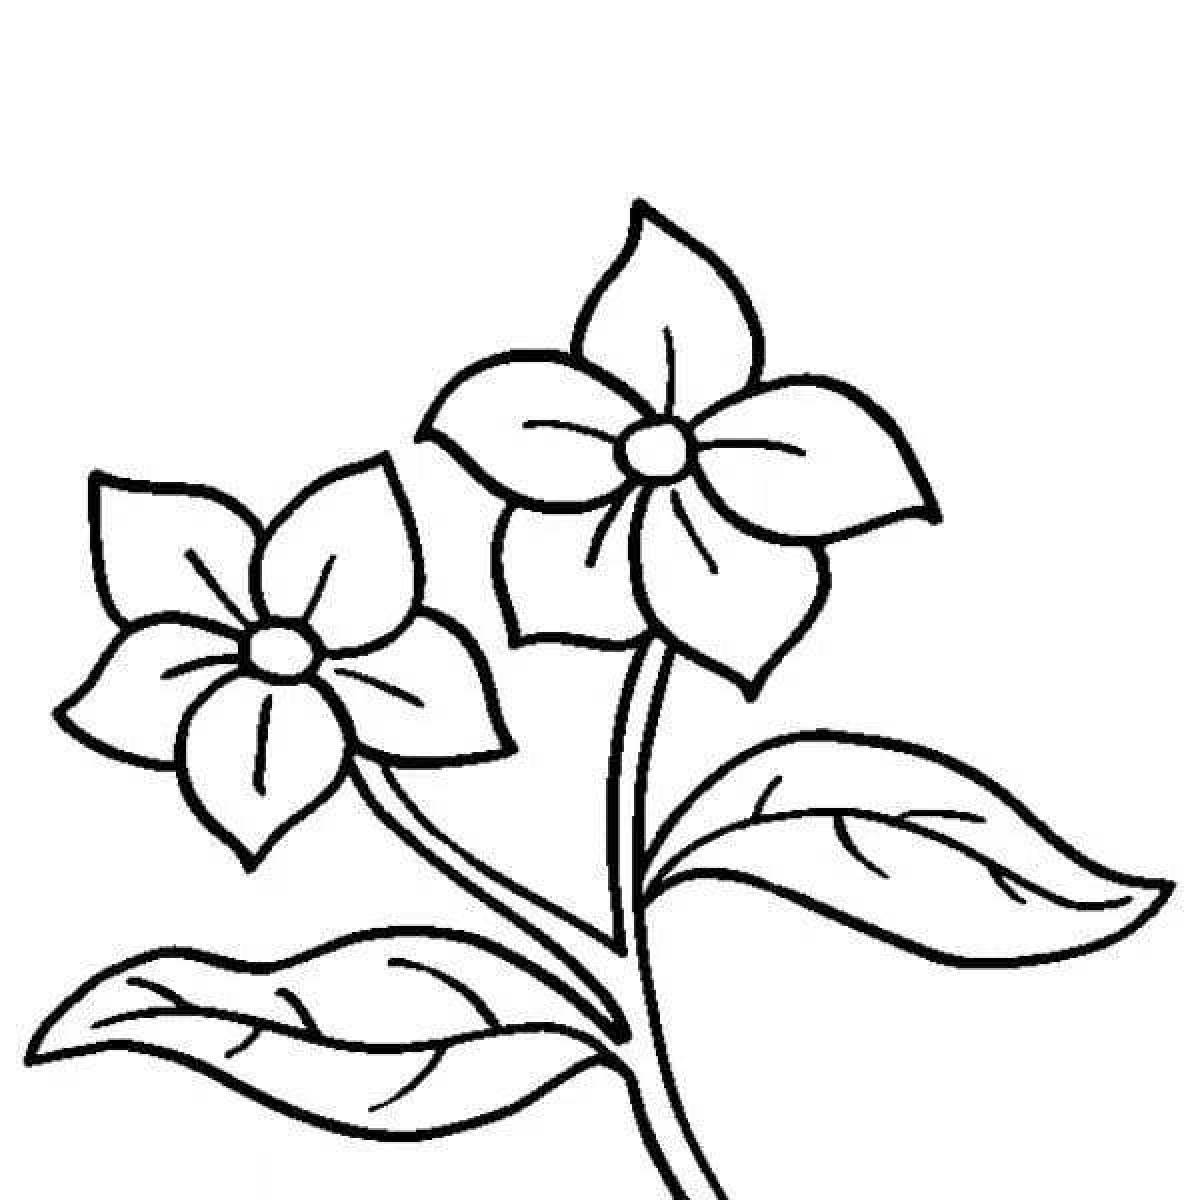 Cute gulder coloring page